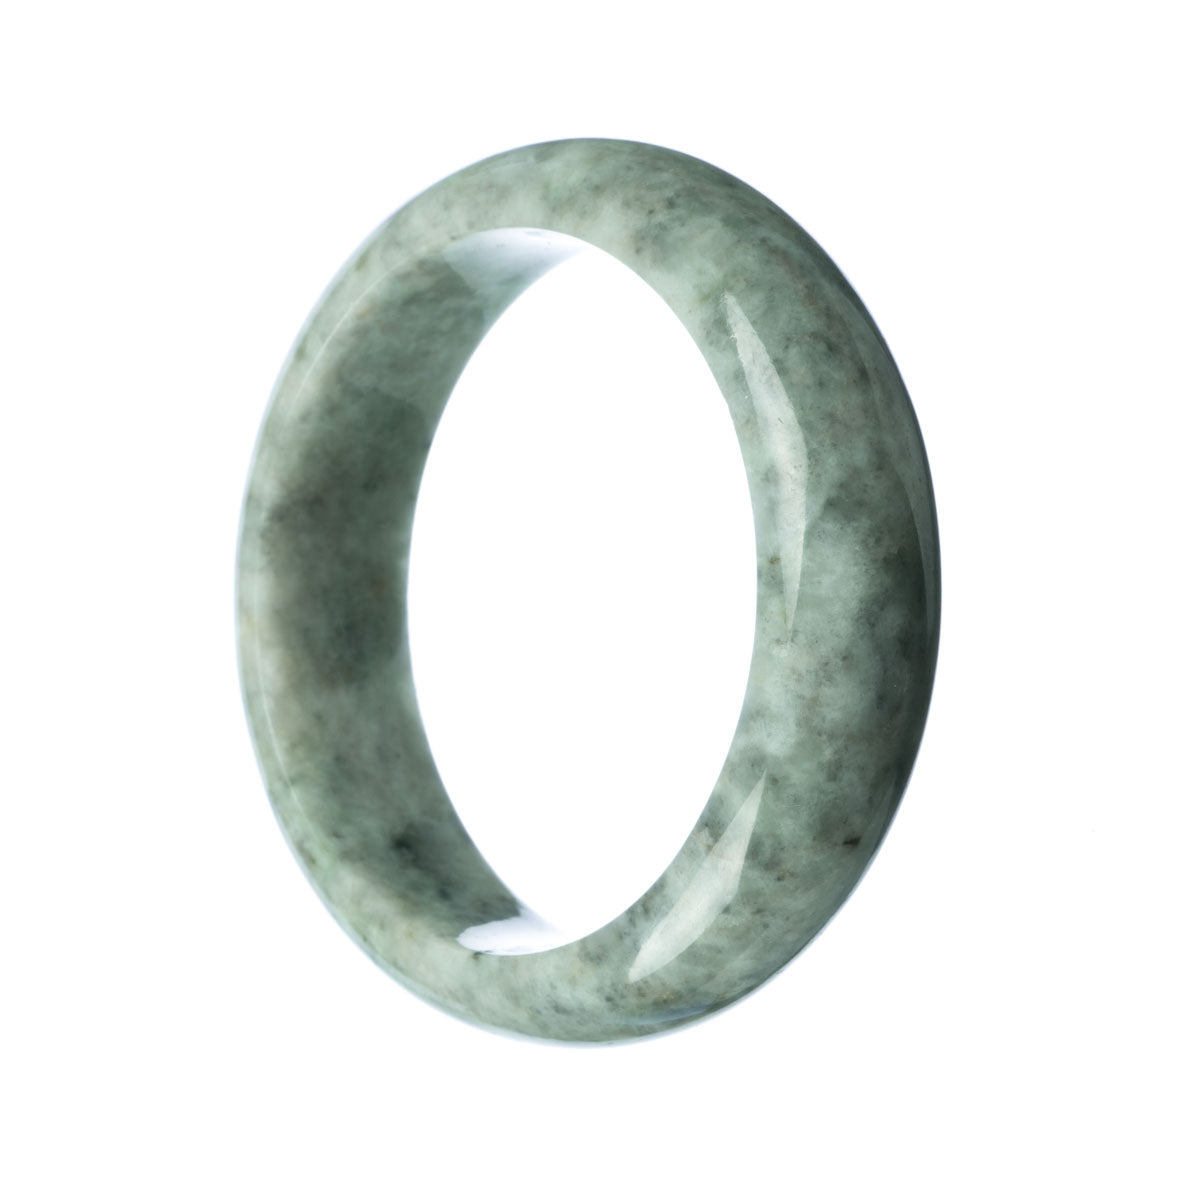 A close-up photo of a half-moon shaped bangle bracelet made of certified untreated grey green jade. The bracelet has a smooth and polished surface, showcasing the natural beauty of the jade. The size of the bracelet is 58mm, making it a perfect fit for most wrists. The bracelet is designed by MAYS, a renowned jewelry brand.